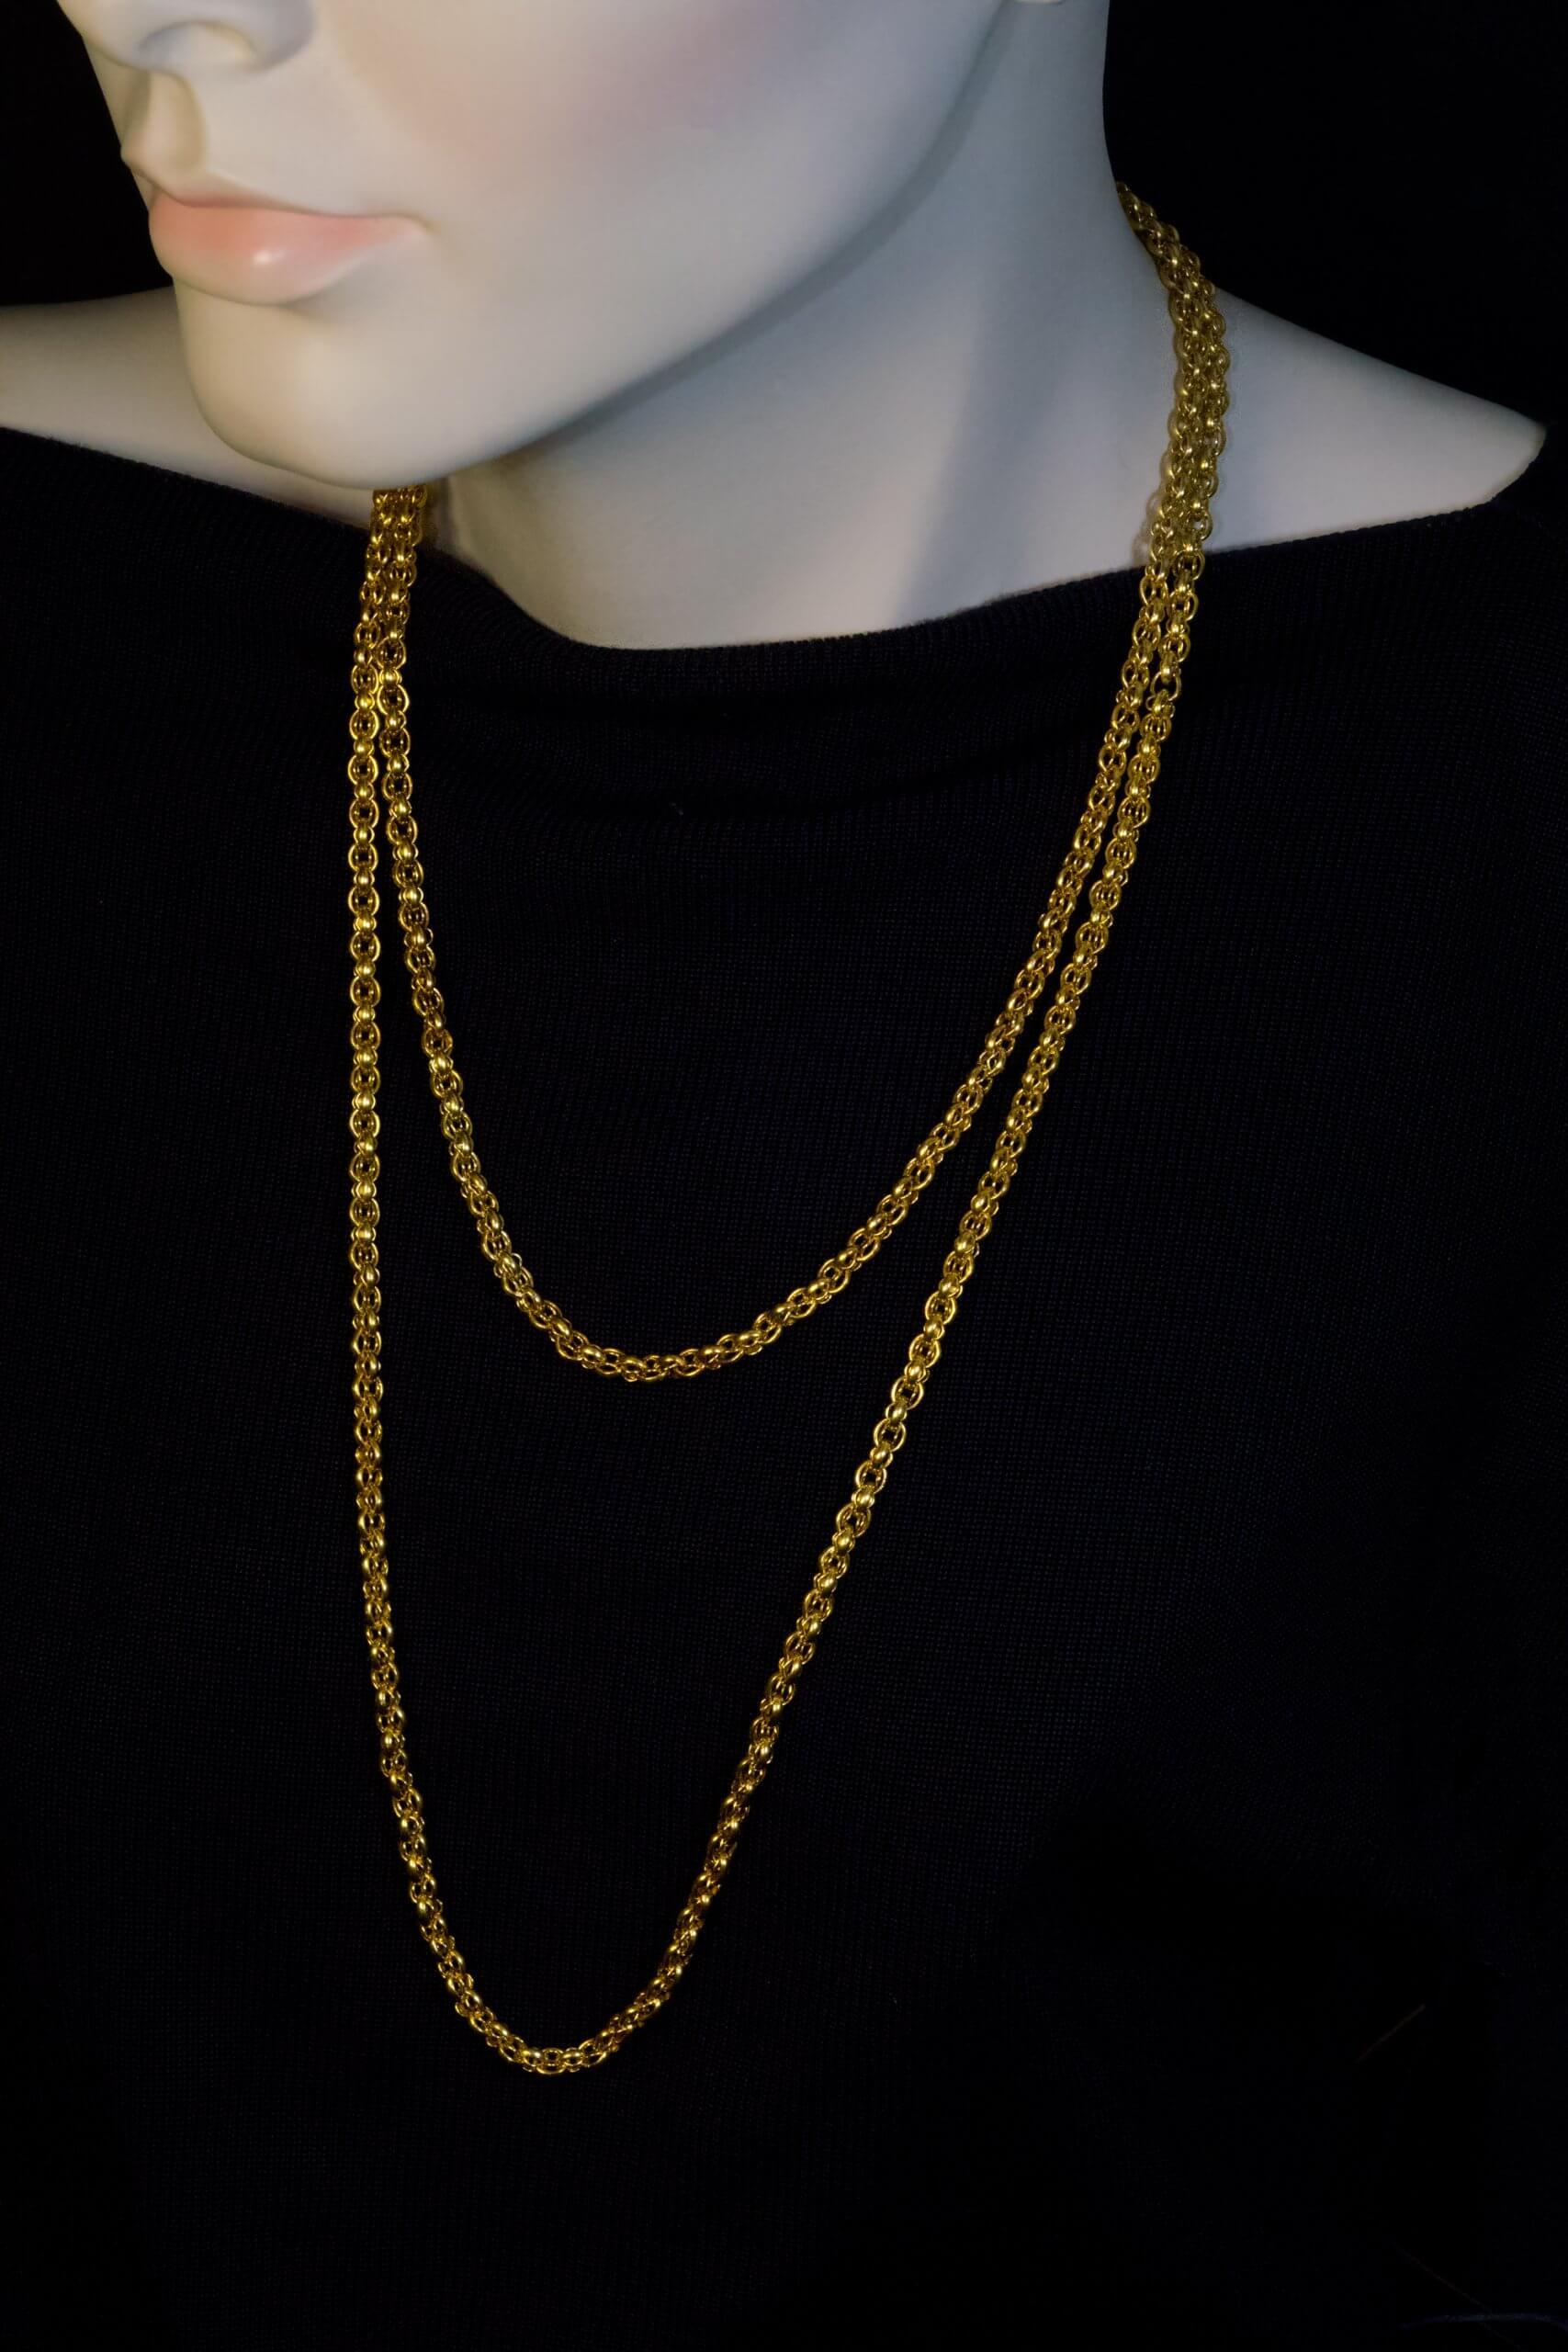 antique gold chains for sale